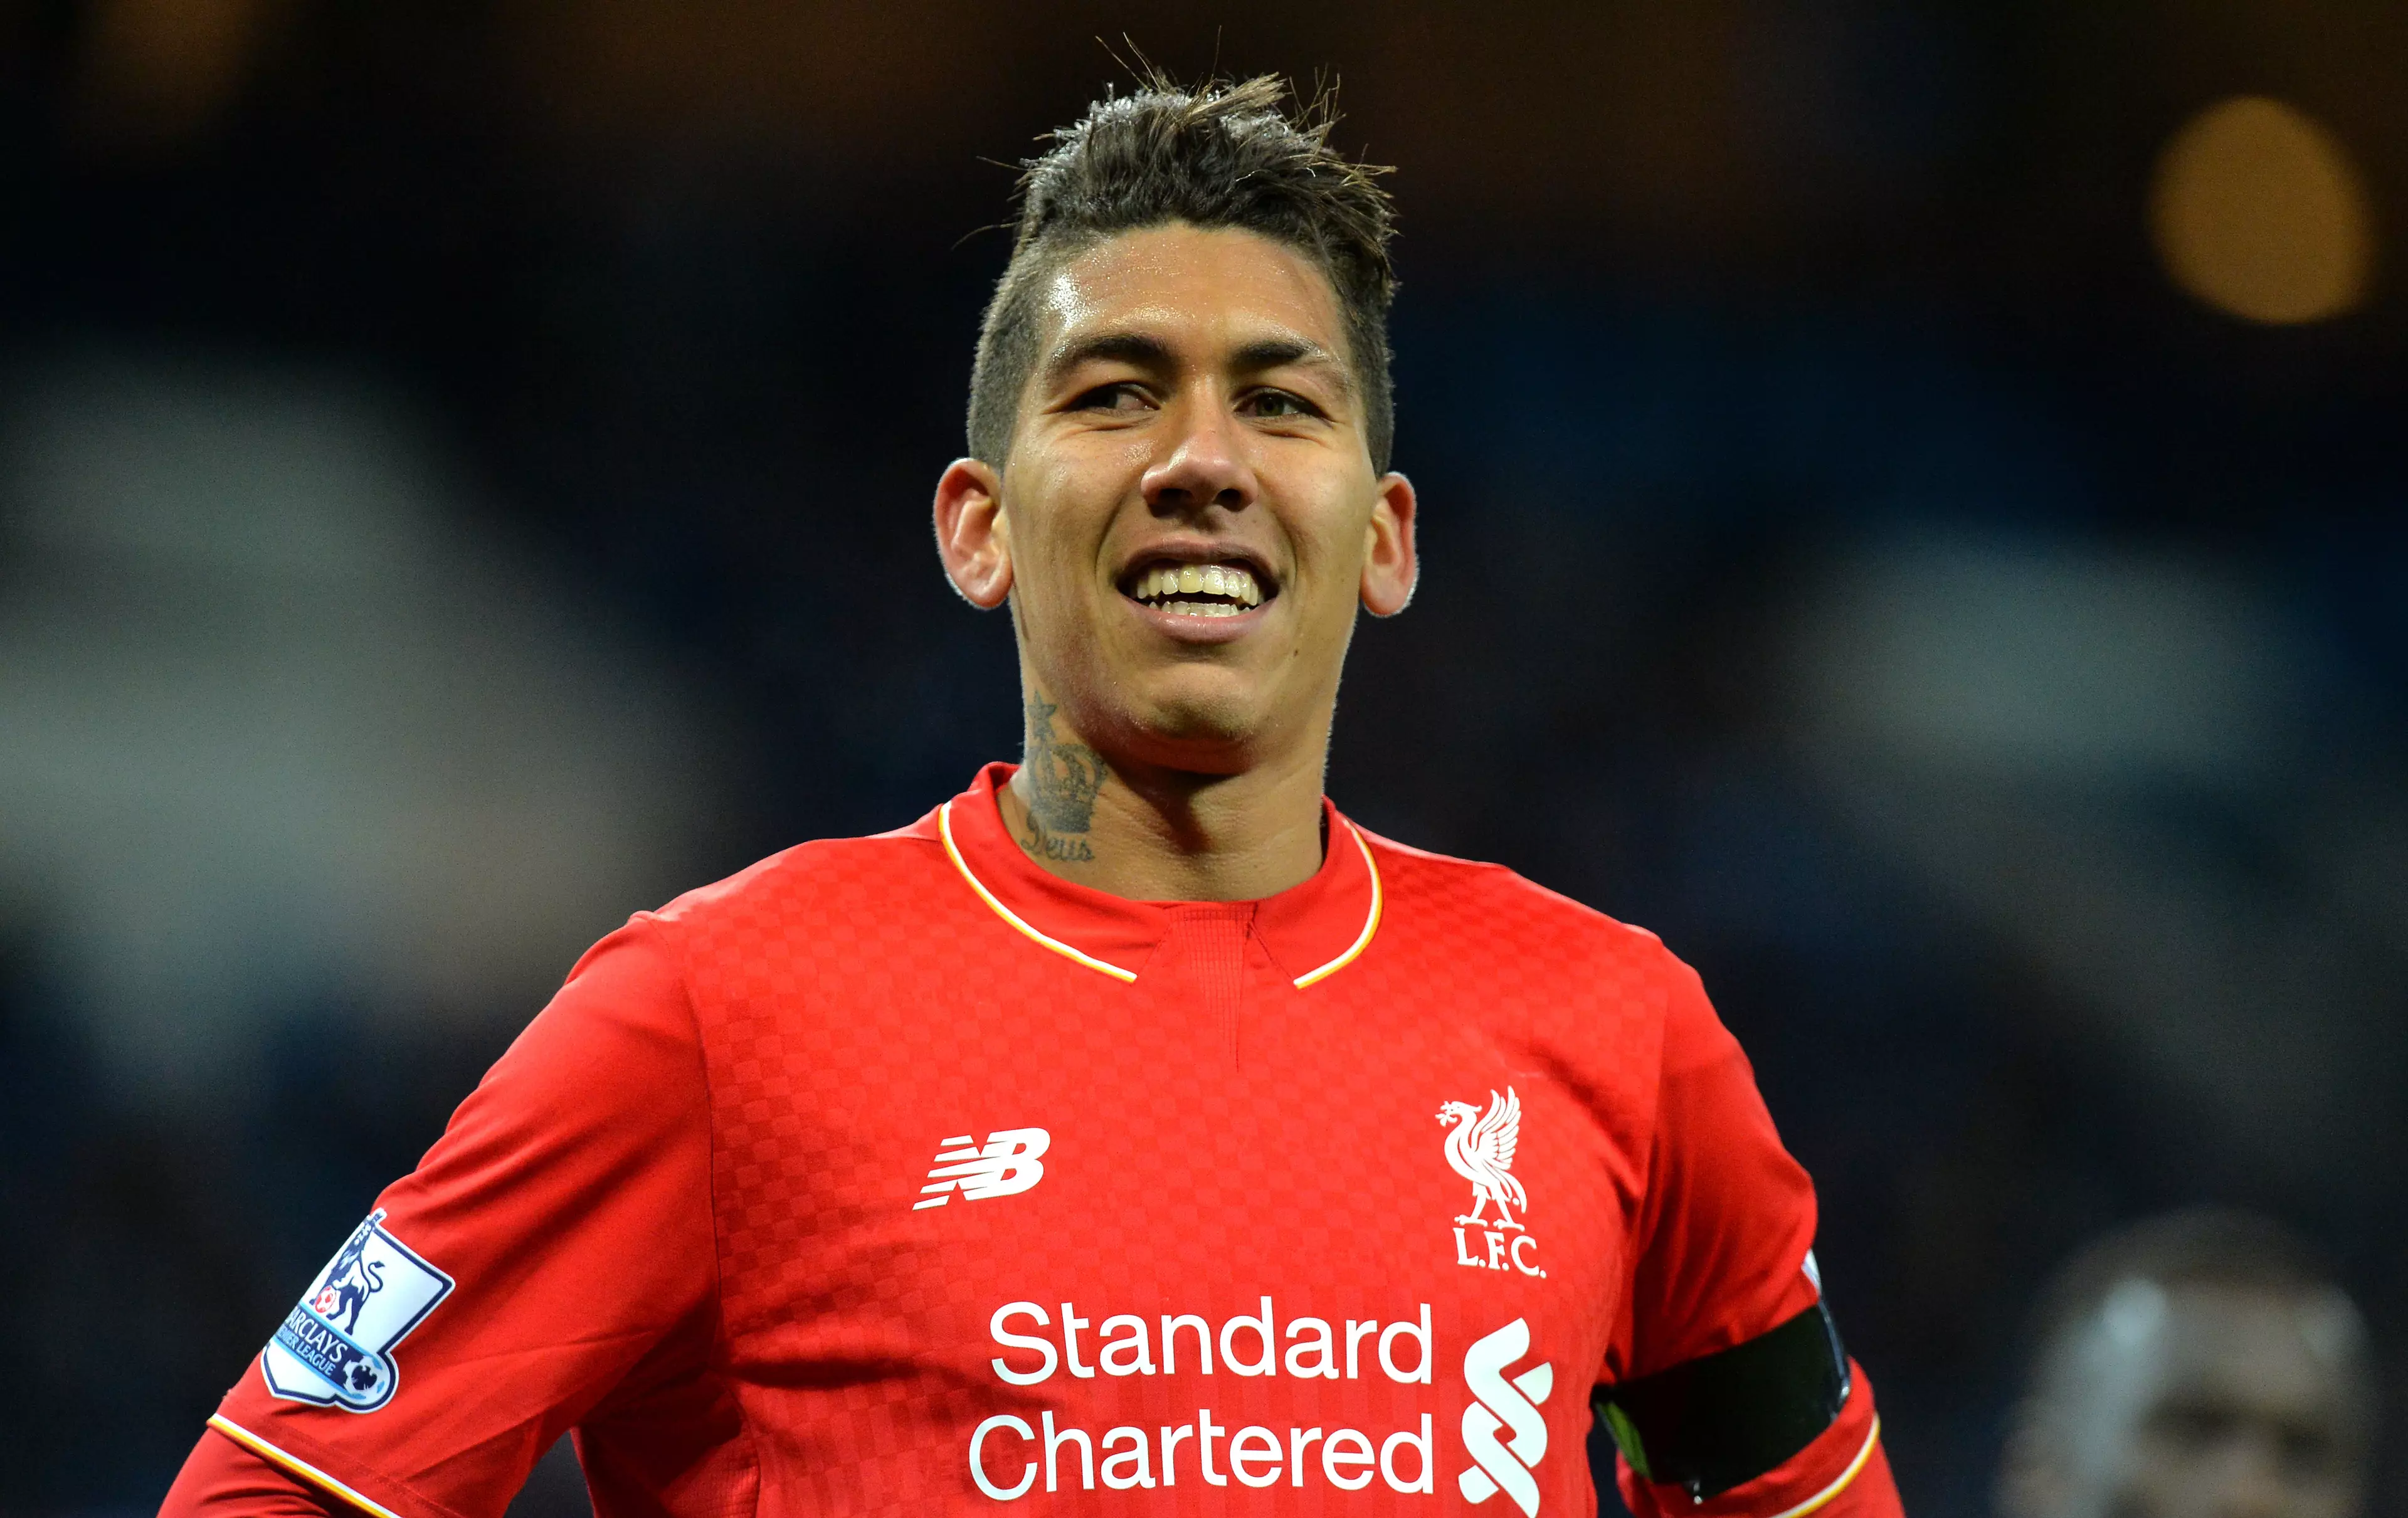 Roberto Firmino Was A Very Different Player Until The Age Of 18